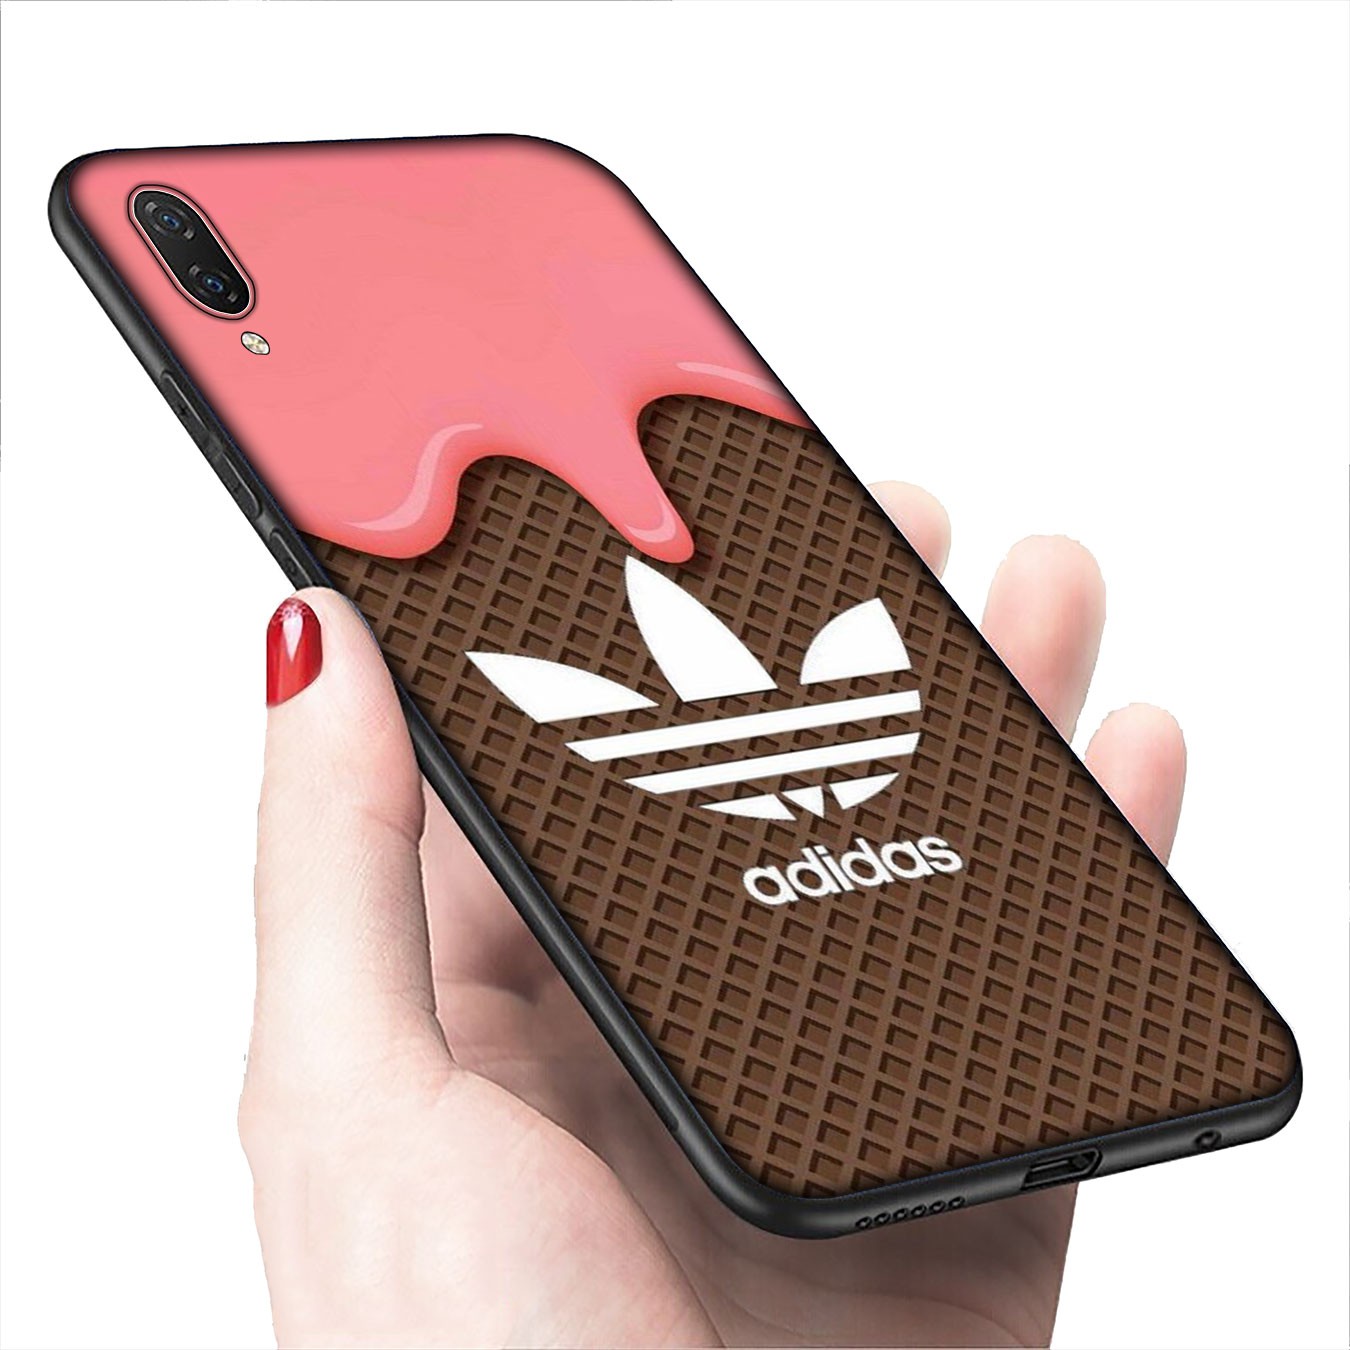 Soft Silicone iPhone 11 Pro XR X XS Max 7 8 6 6s Plus + Cover Logo flower Adidas Phone Case